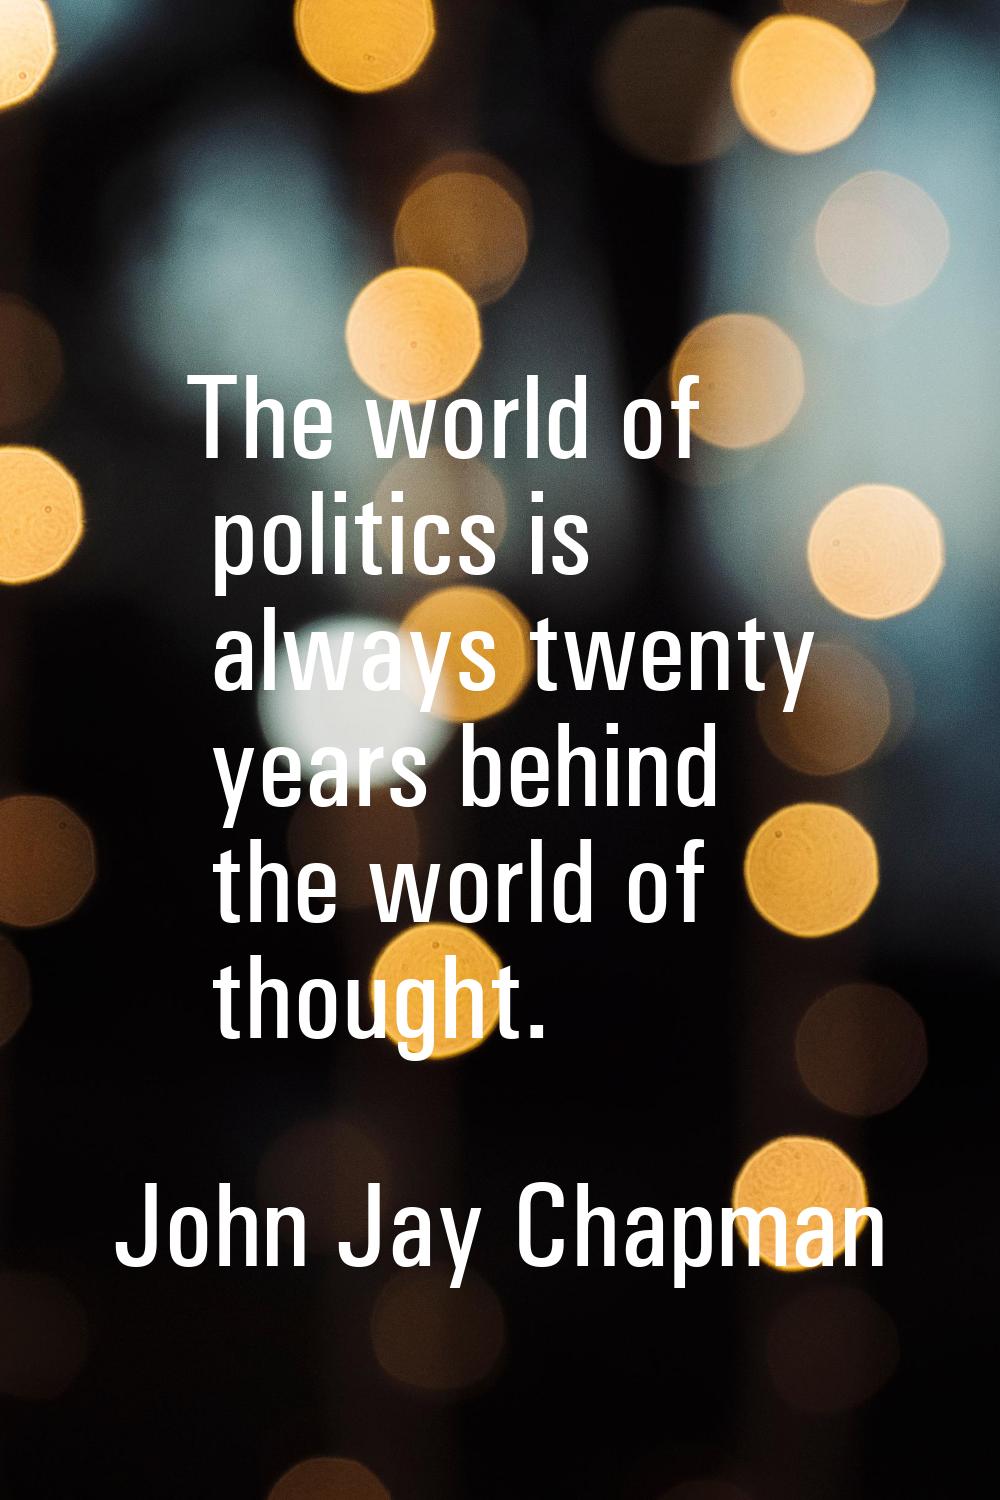 The world of politics is always twenty years behind the world of thought.